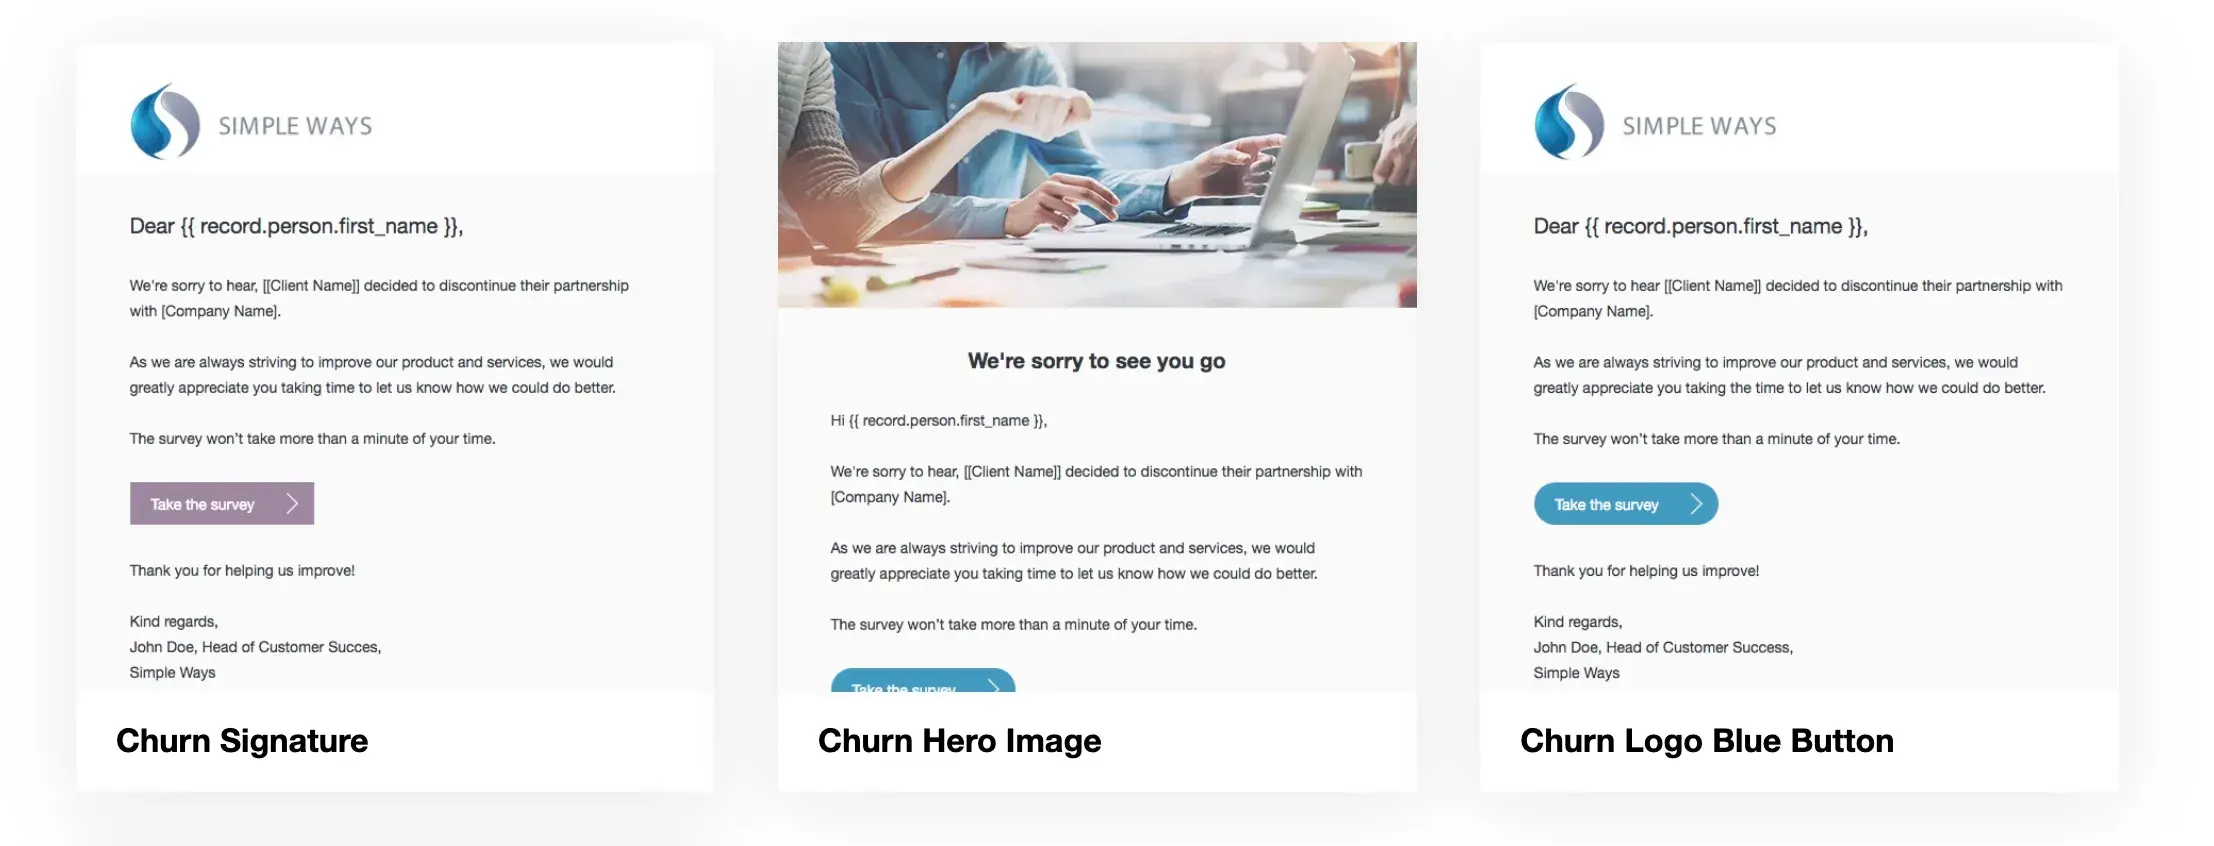 Churn Email Template